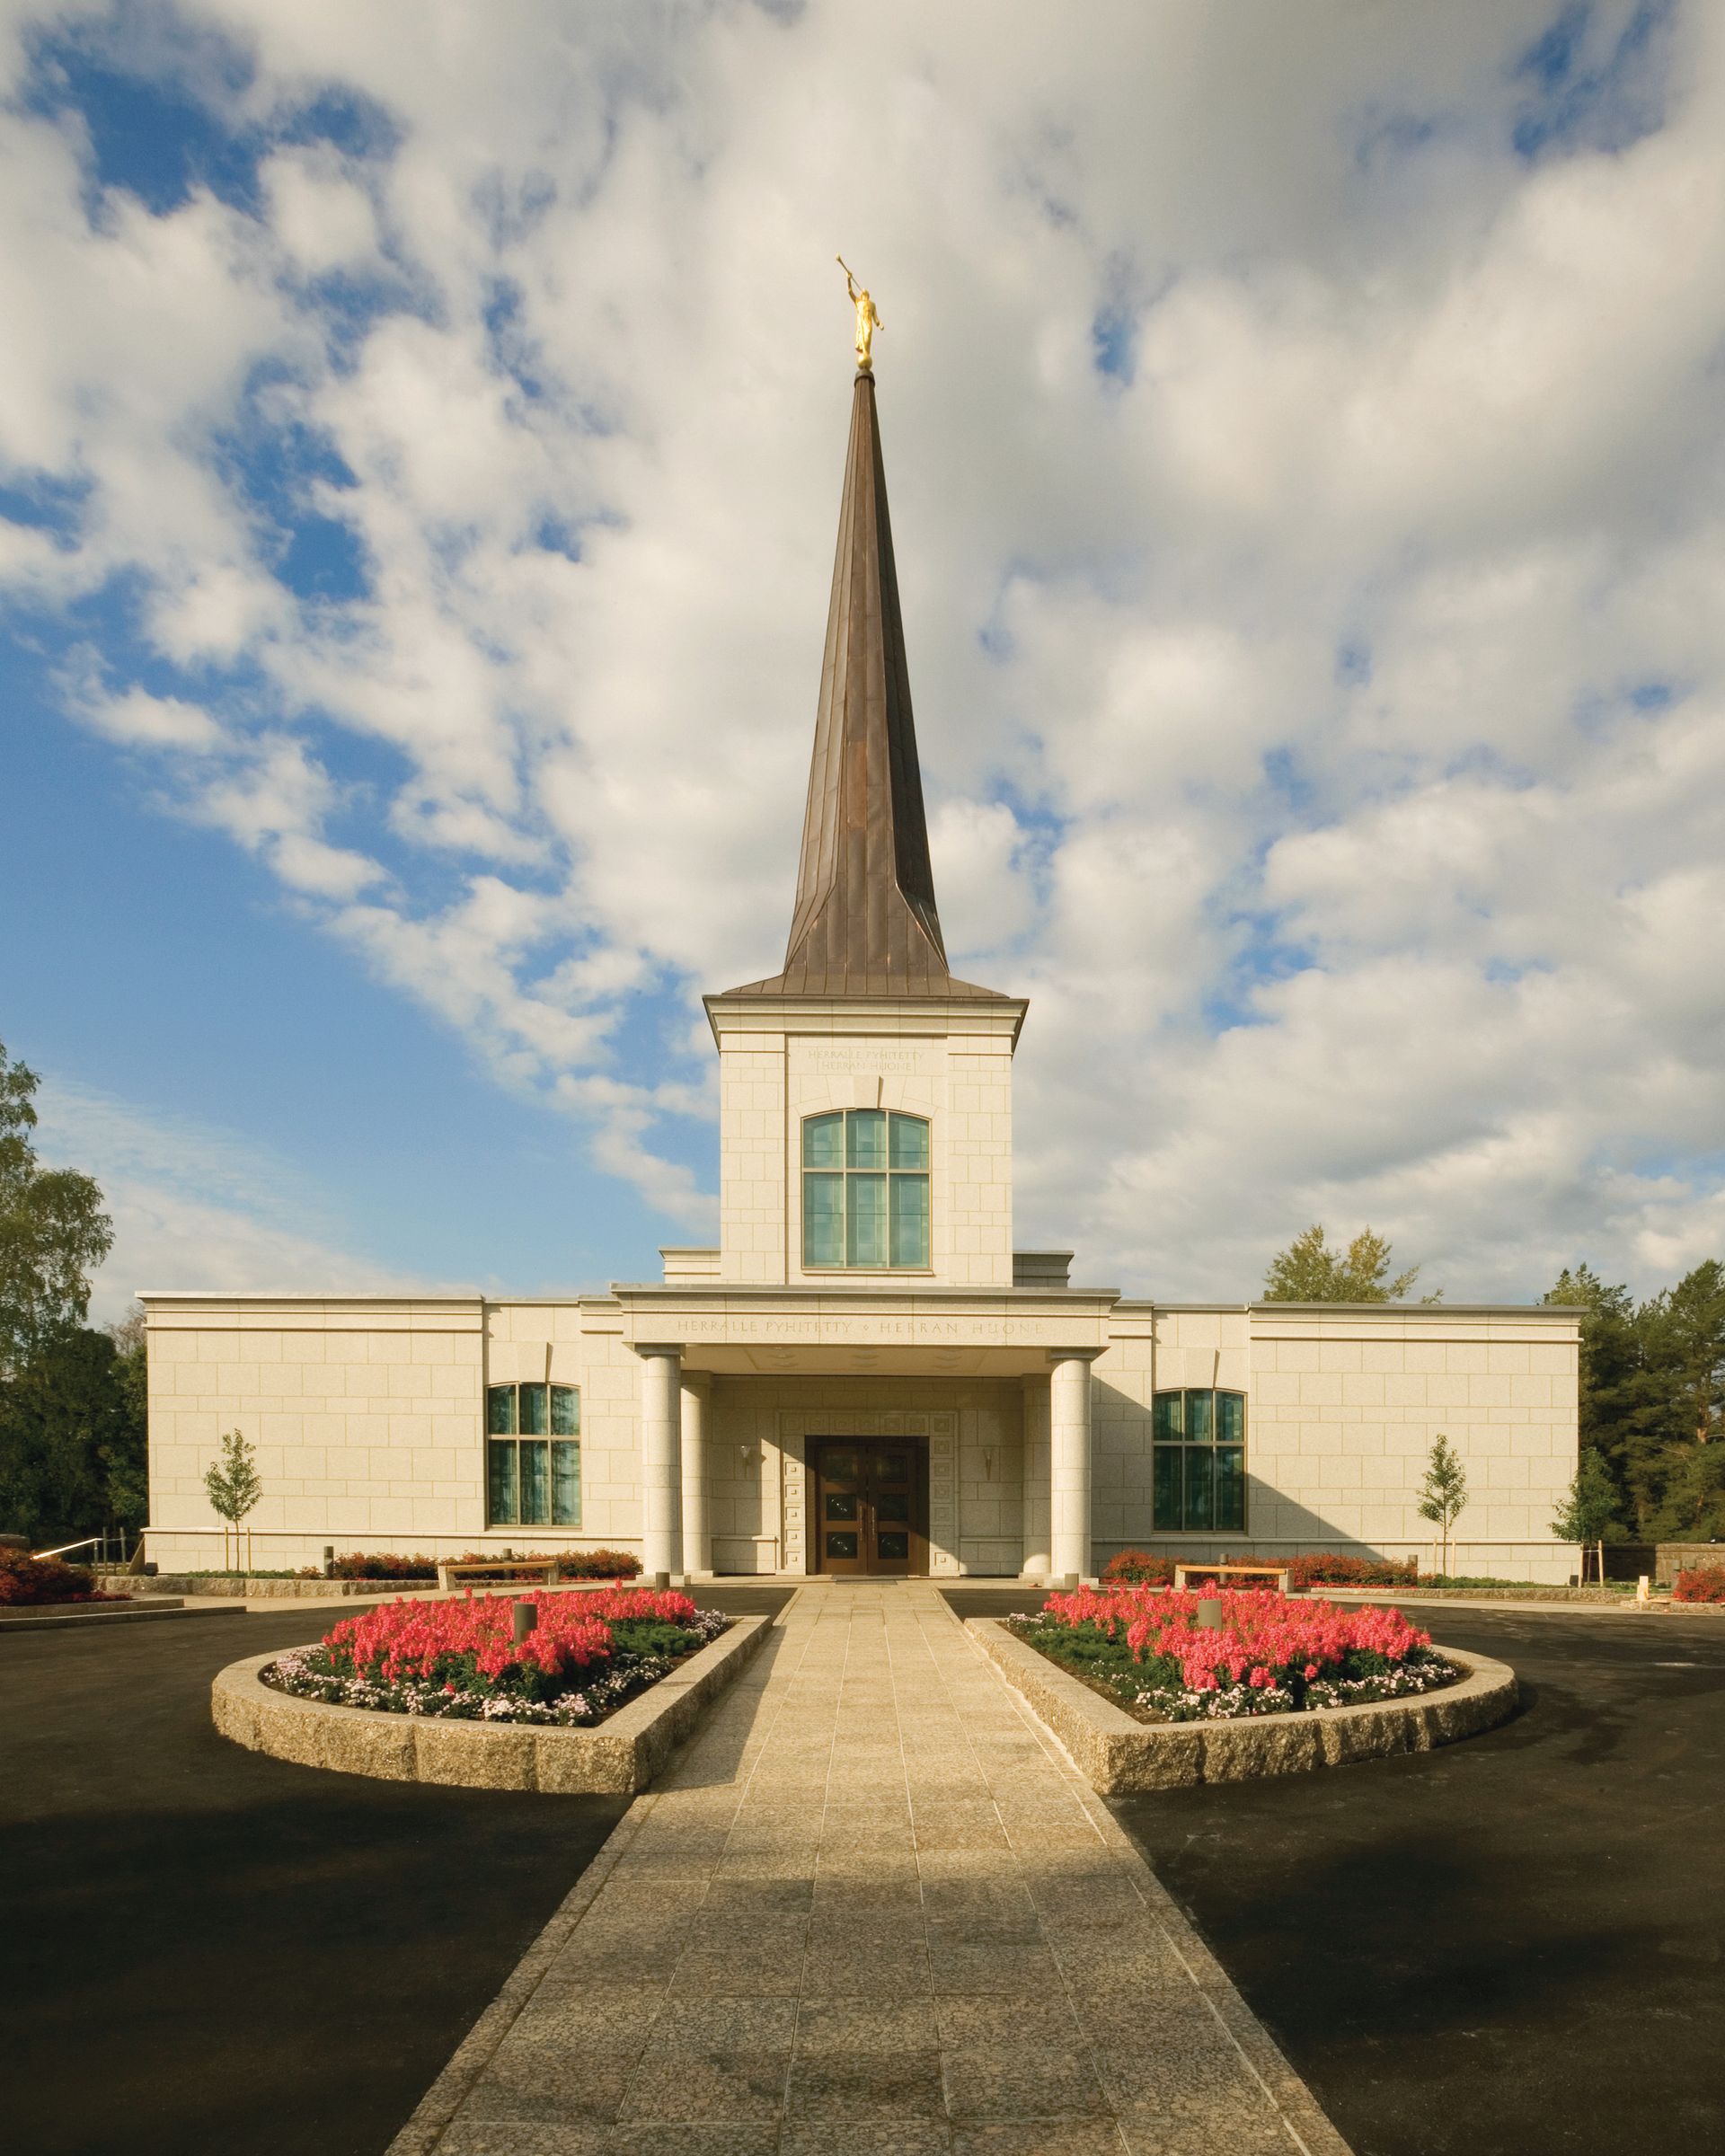 The front entrance to the Helsinki Finland Temple.